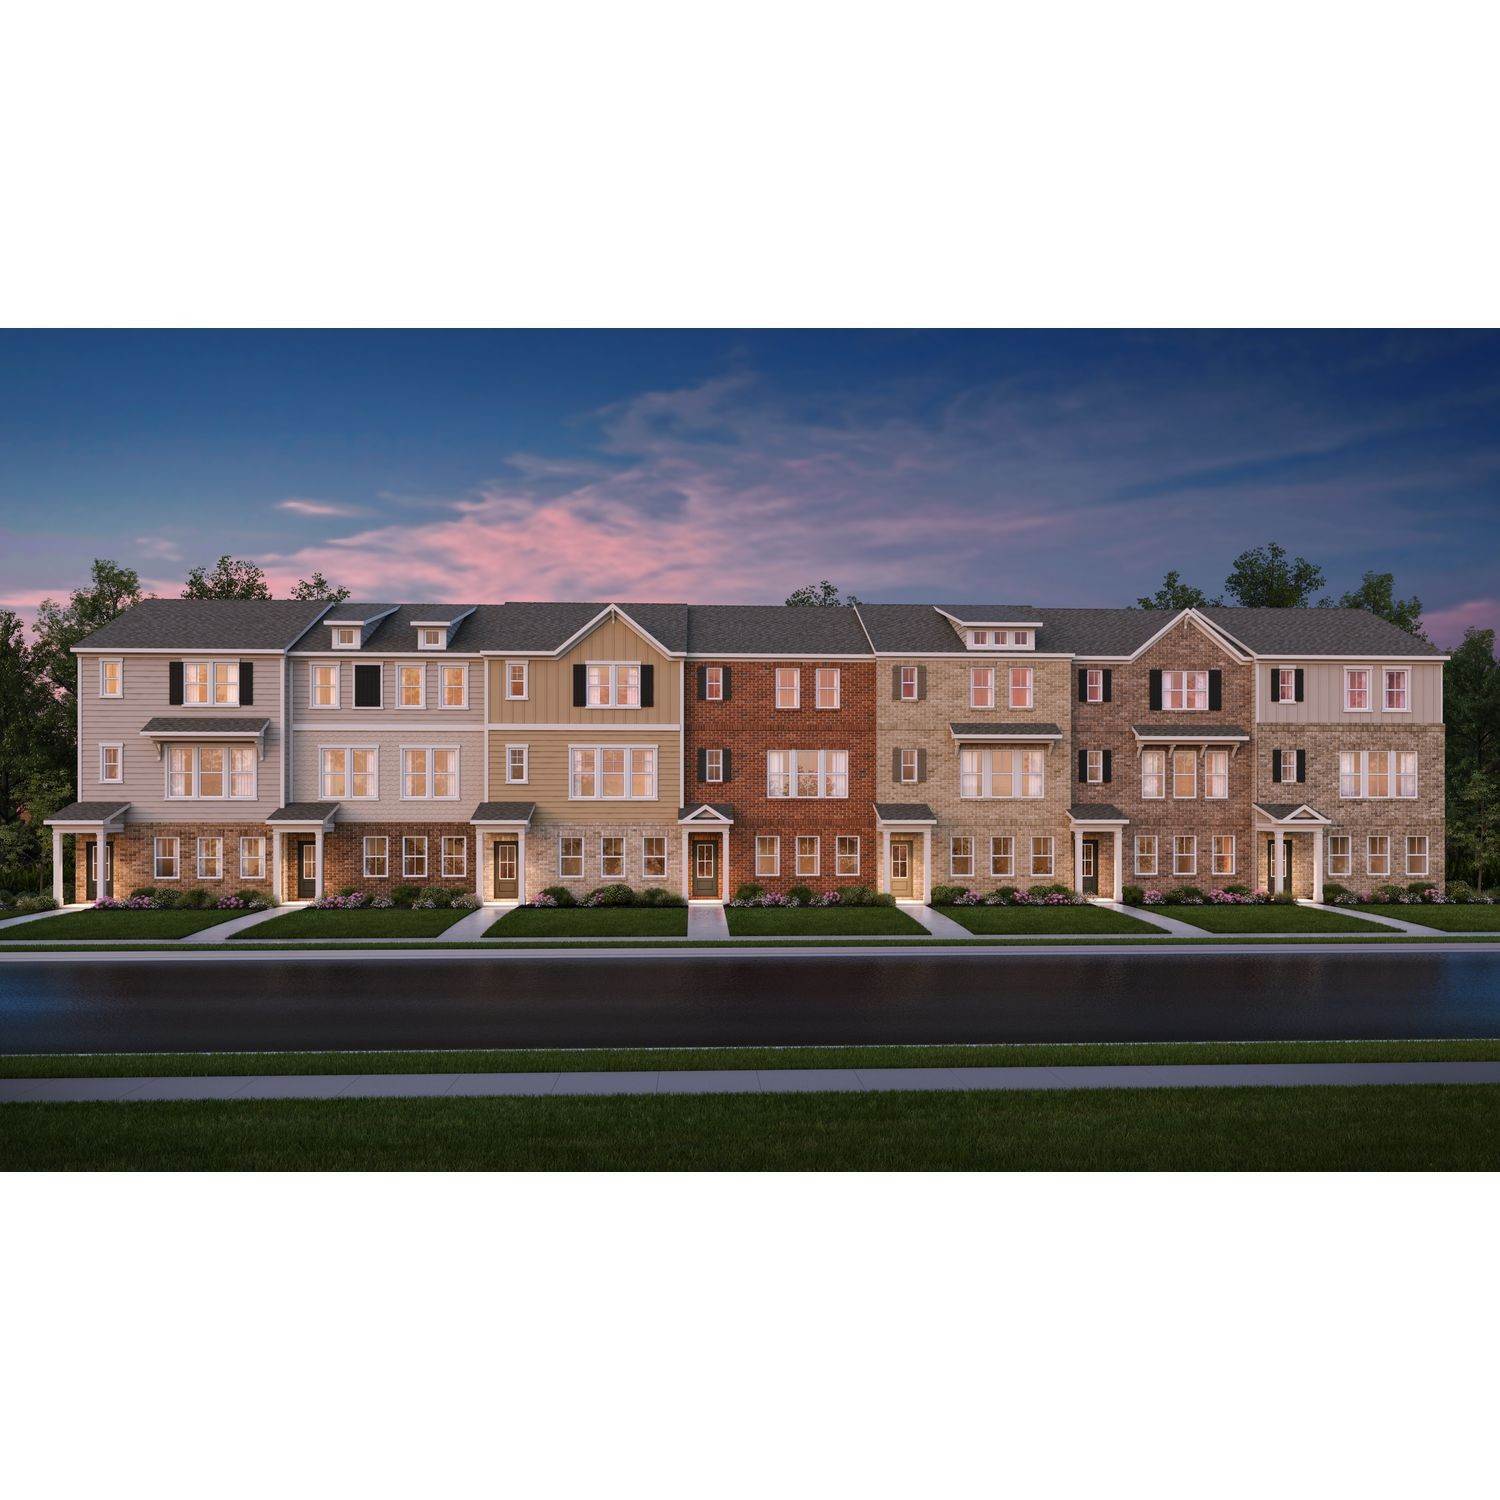 Single Family for Sale at Bethesda Townhomes - Spalding 17 Bethesda Church Road LAWRENCEVILLE, GEORGIA 30044 UNITED STATES